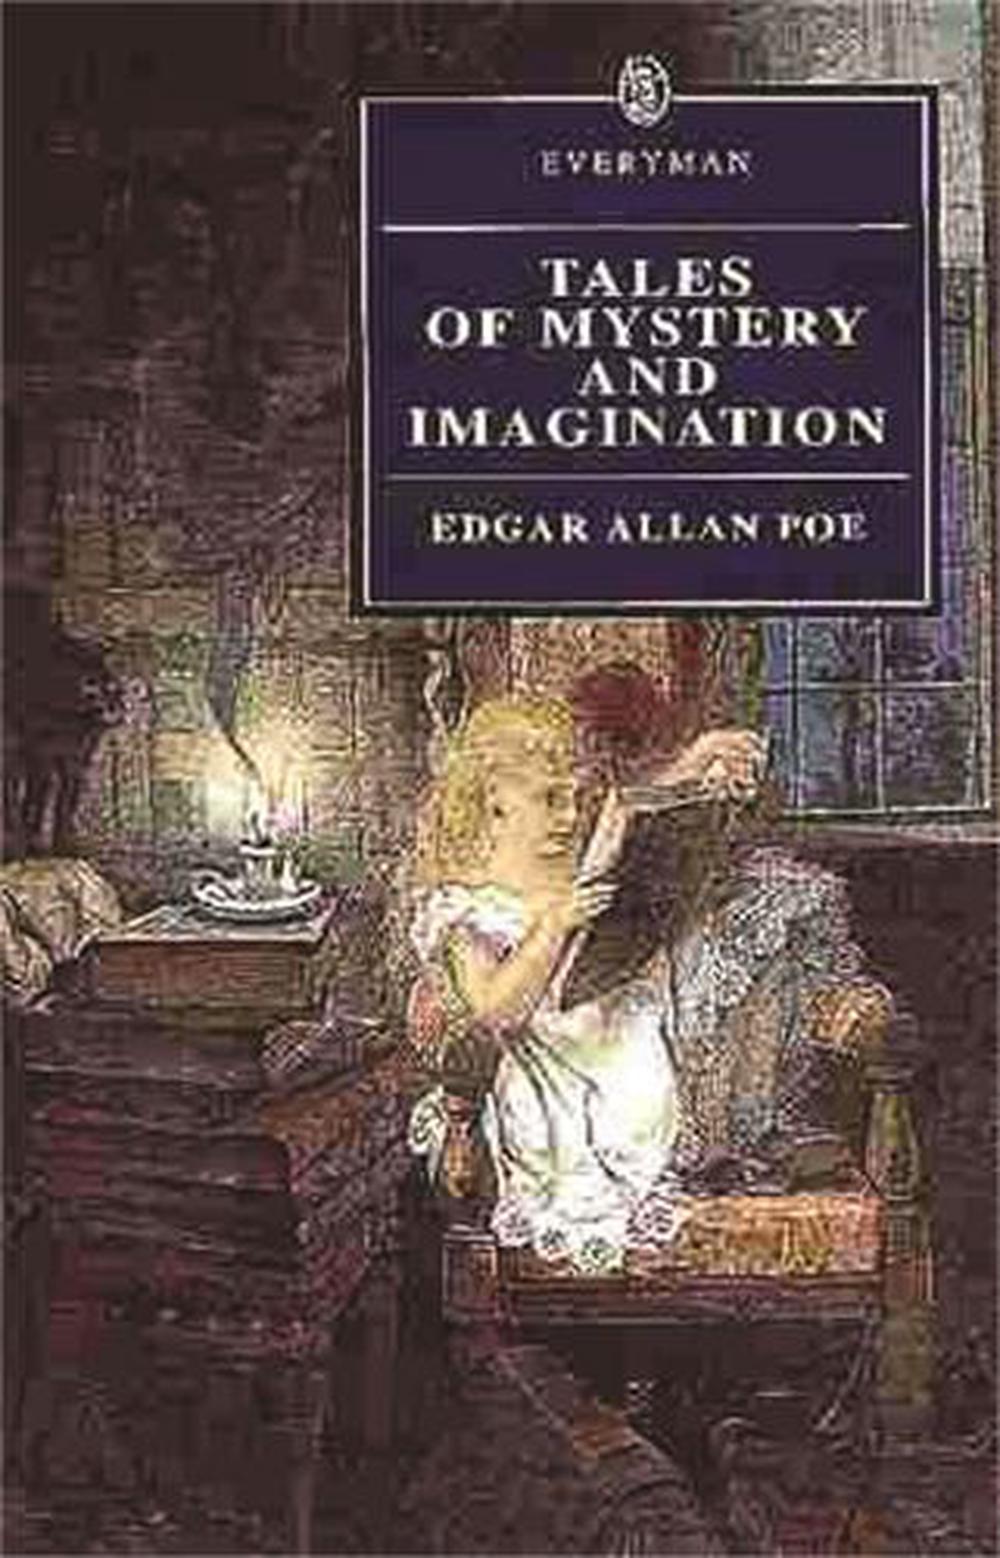 poe tales of mystery and imagination